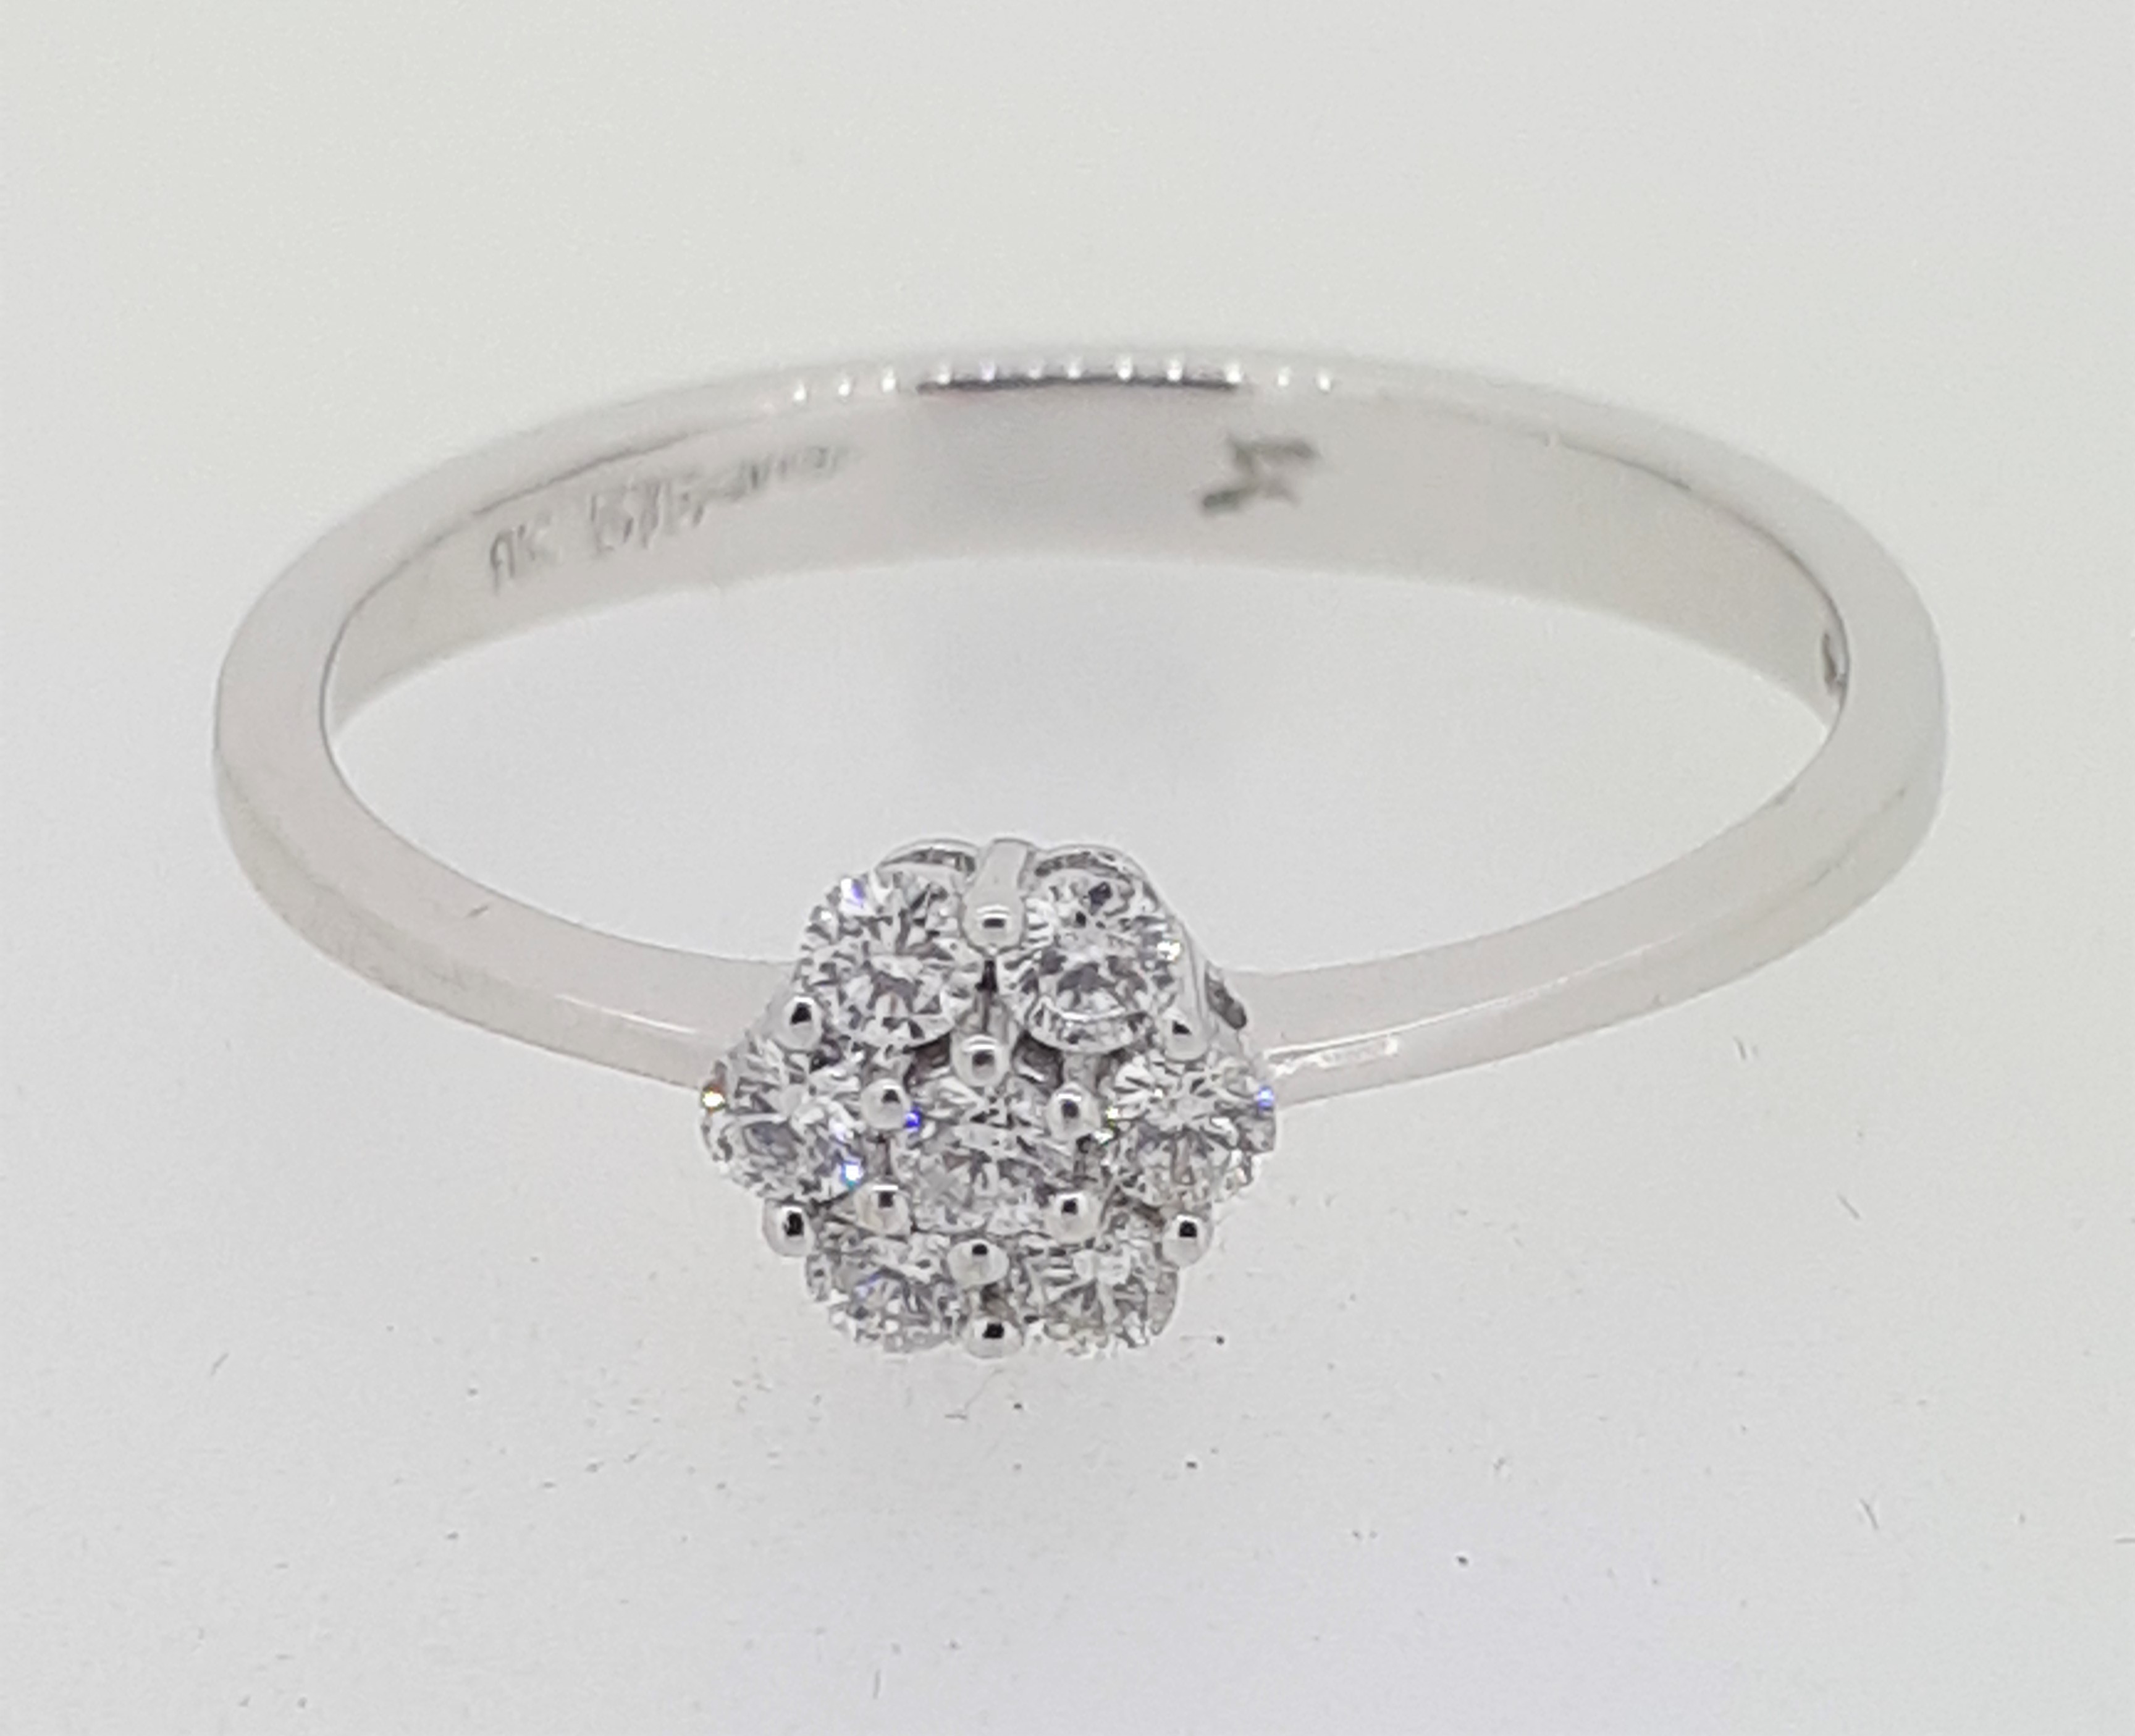 9ct (375) White Gold 0.26ct Diamond Cluster Ring - Image 2 of 5